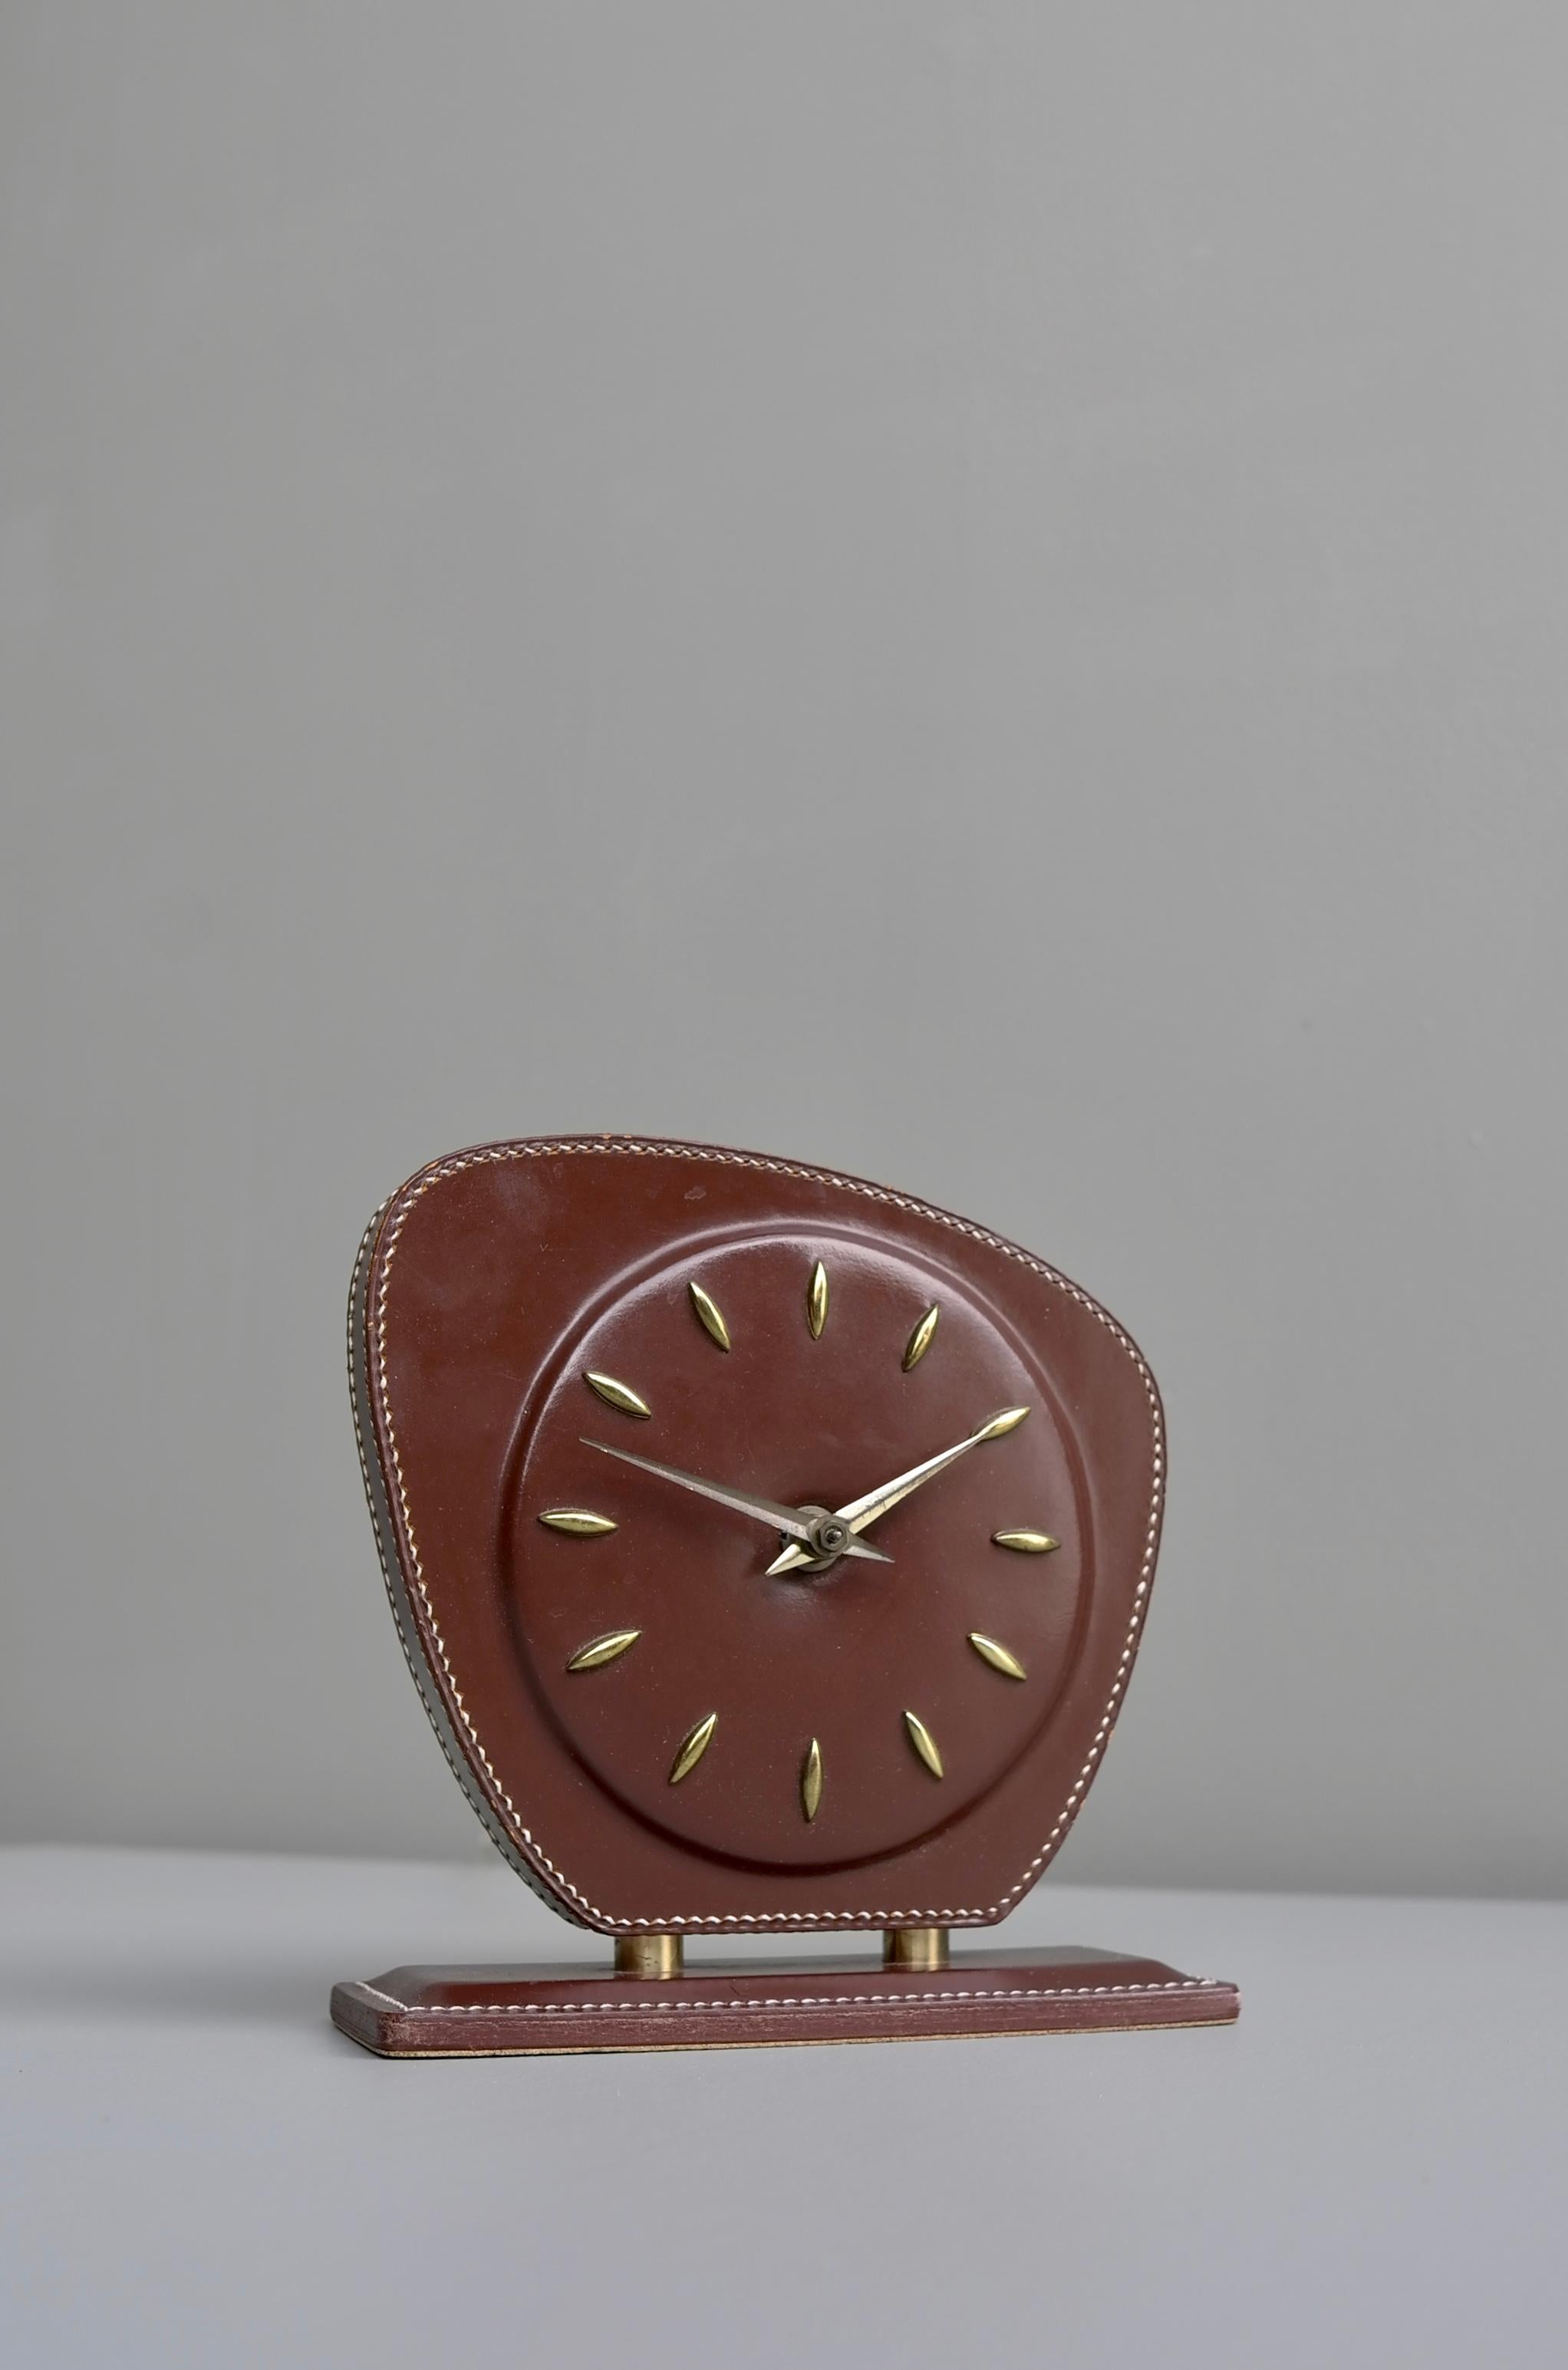 French Handstitched Brown Leather Clock, Jacques Adnet Attributed, 1950s In Good Condition For Sale In Den Haag, NL